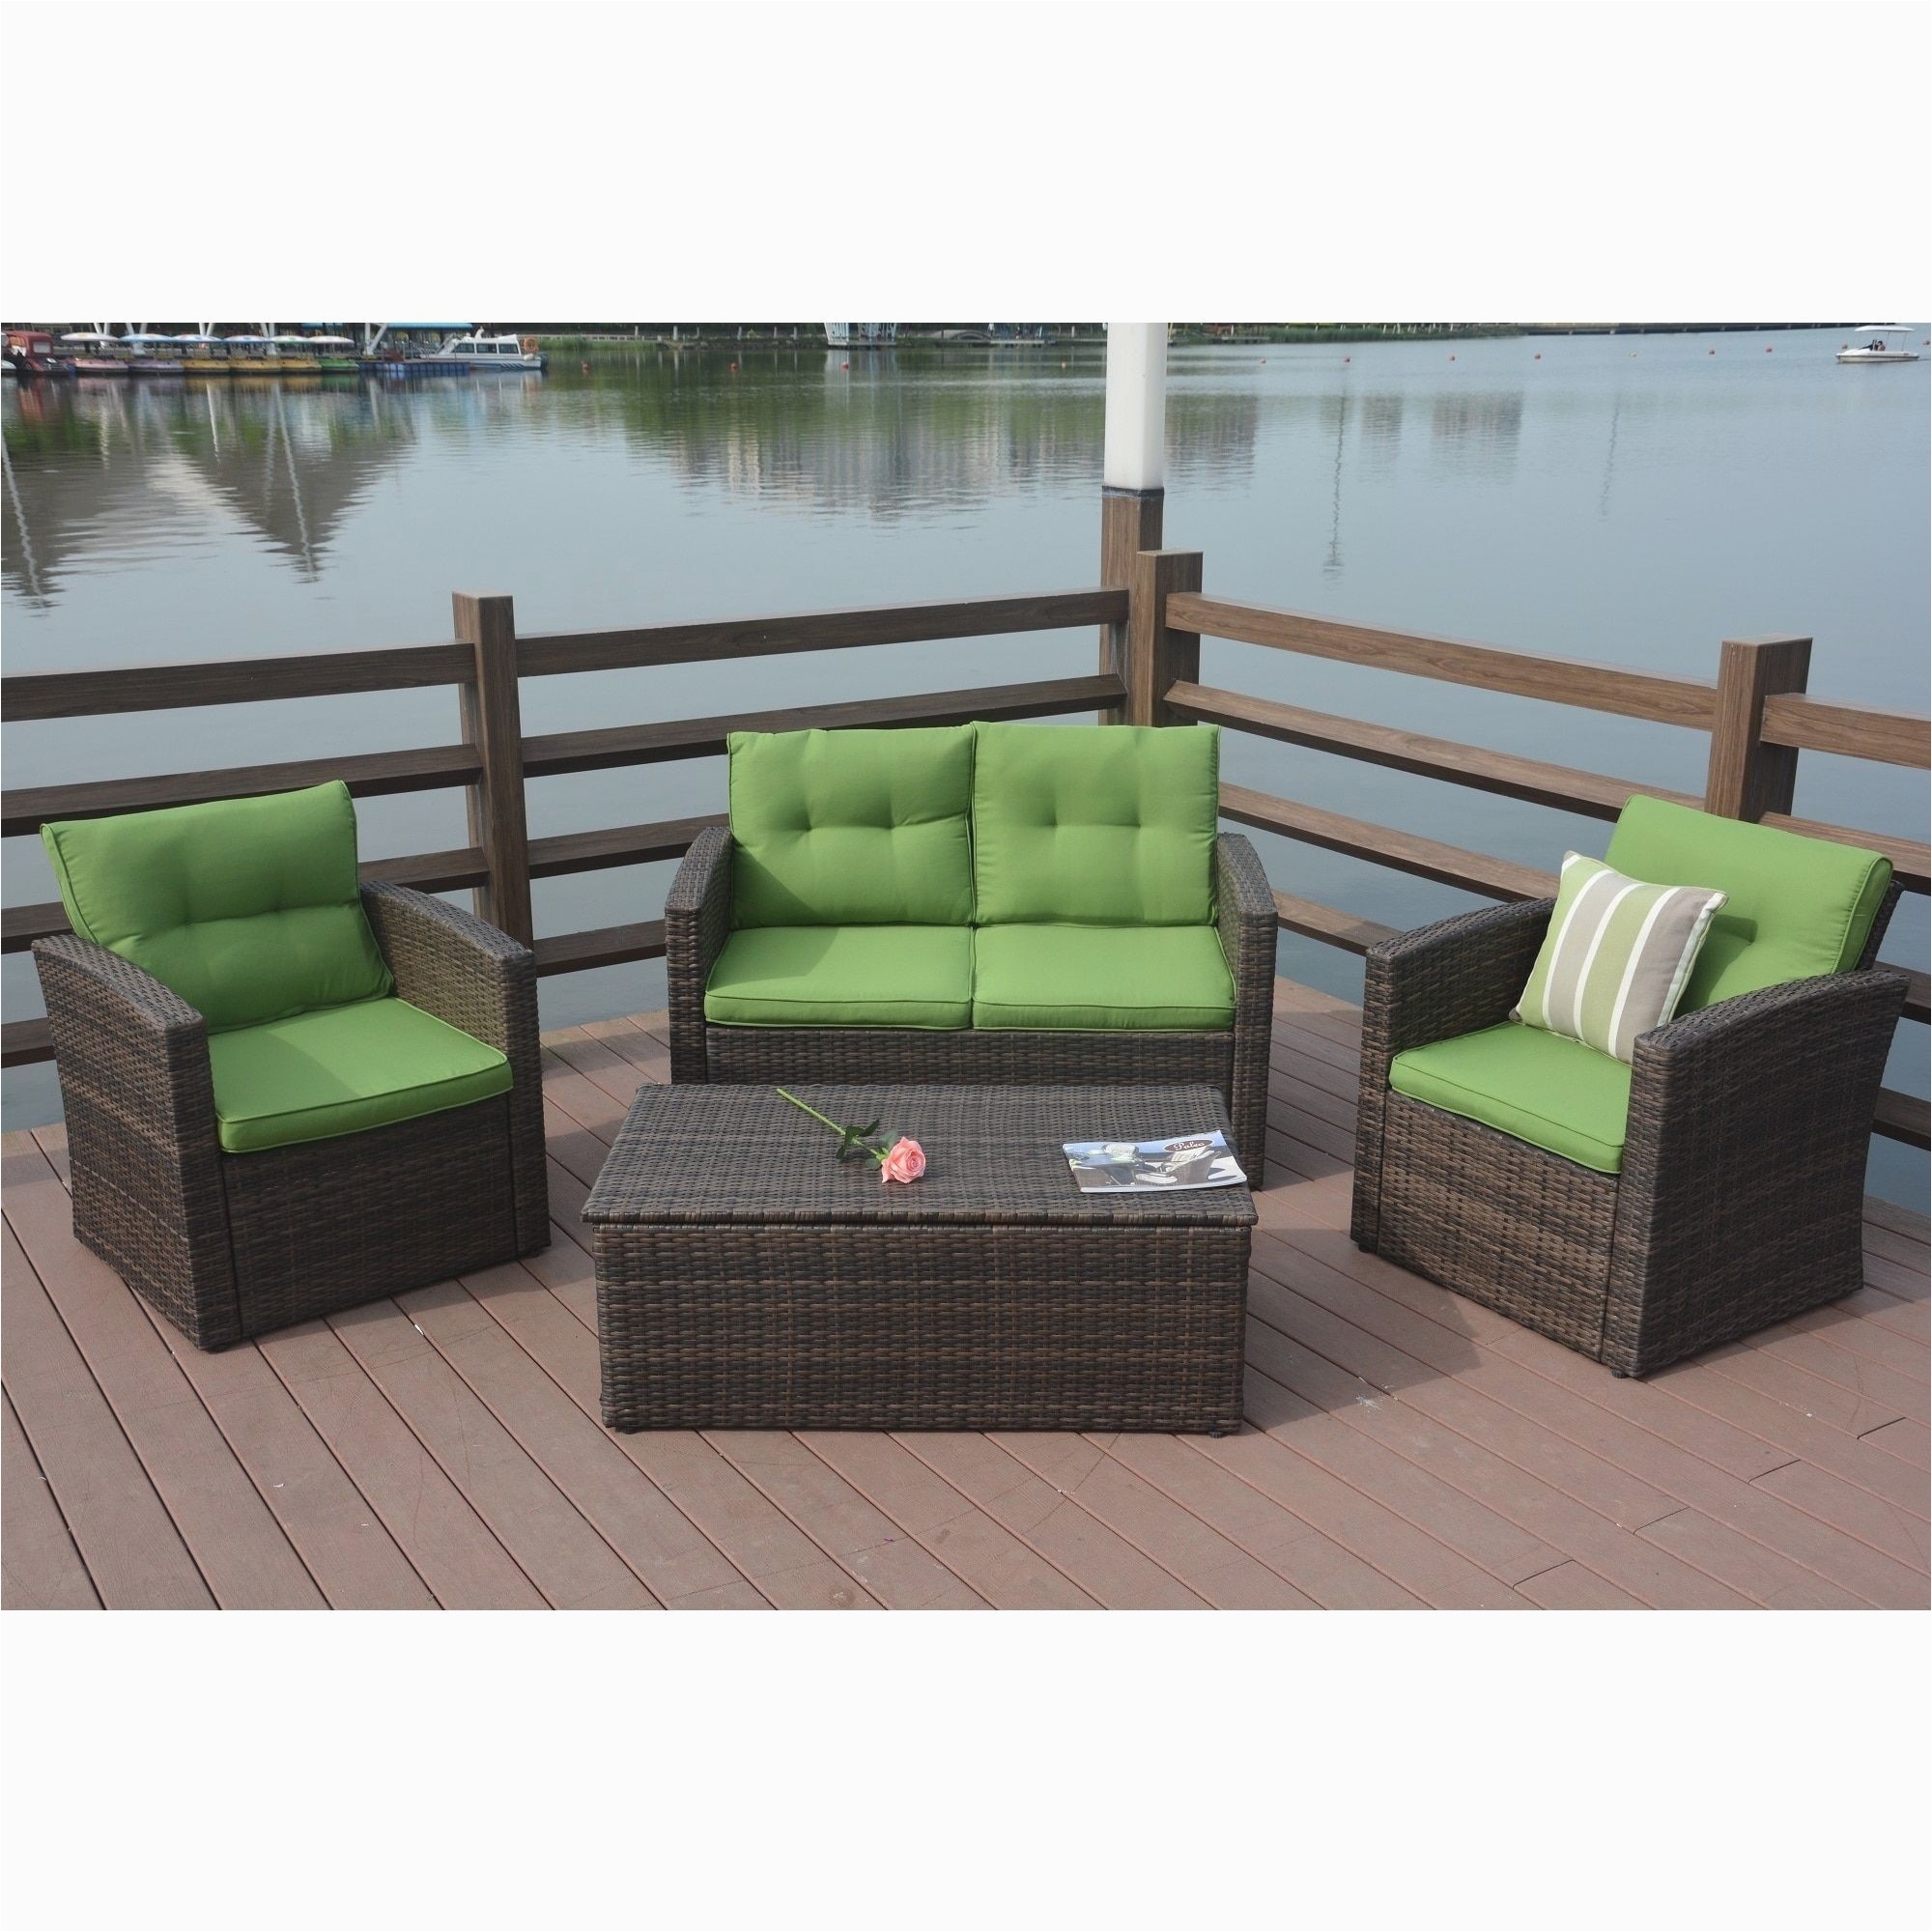 Cheap Patio Furniture Sets Under 200 25 New Of Cheap Patio Furniture Sets Under 200 Image Home